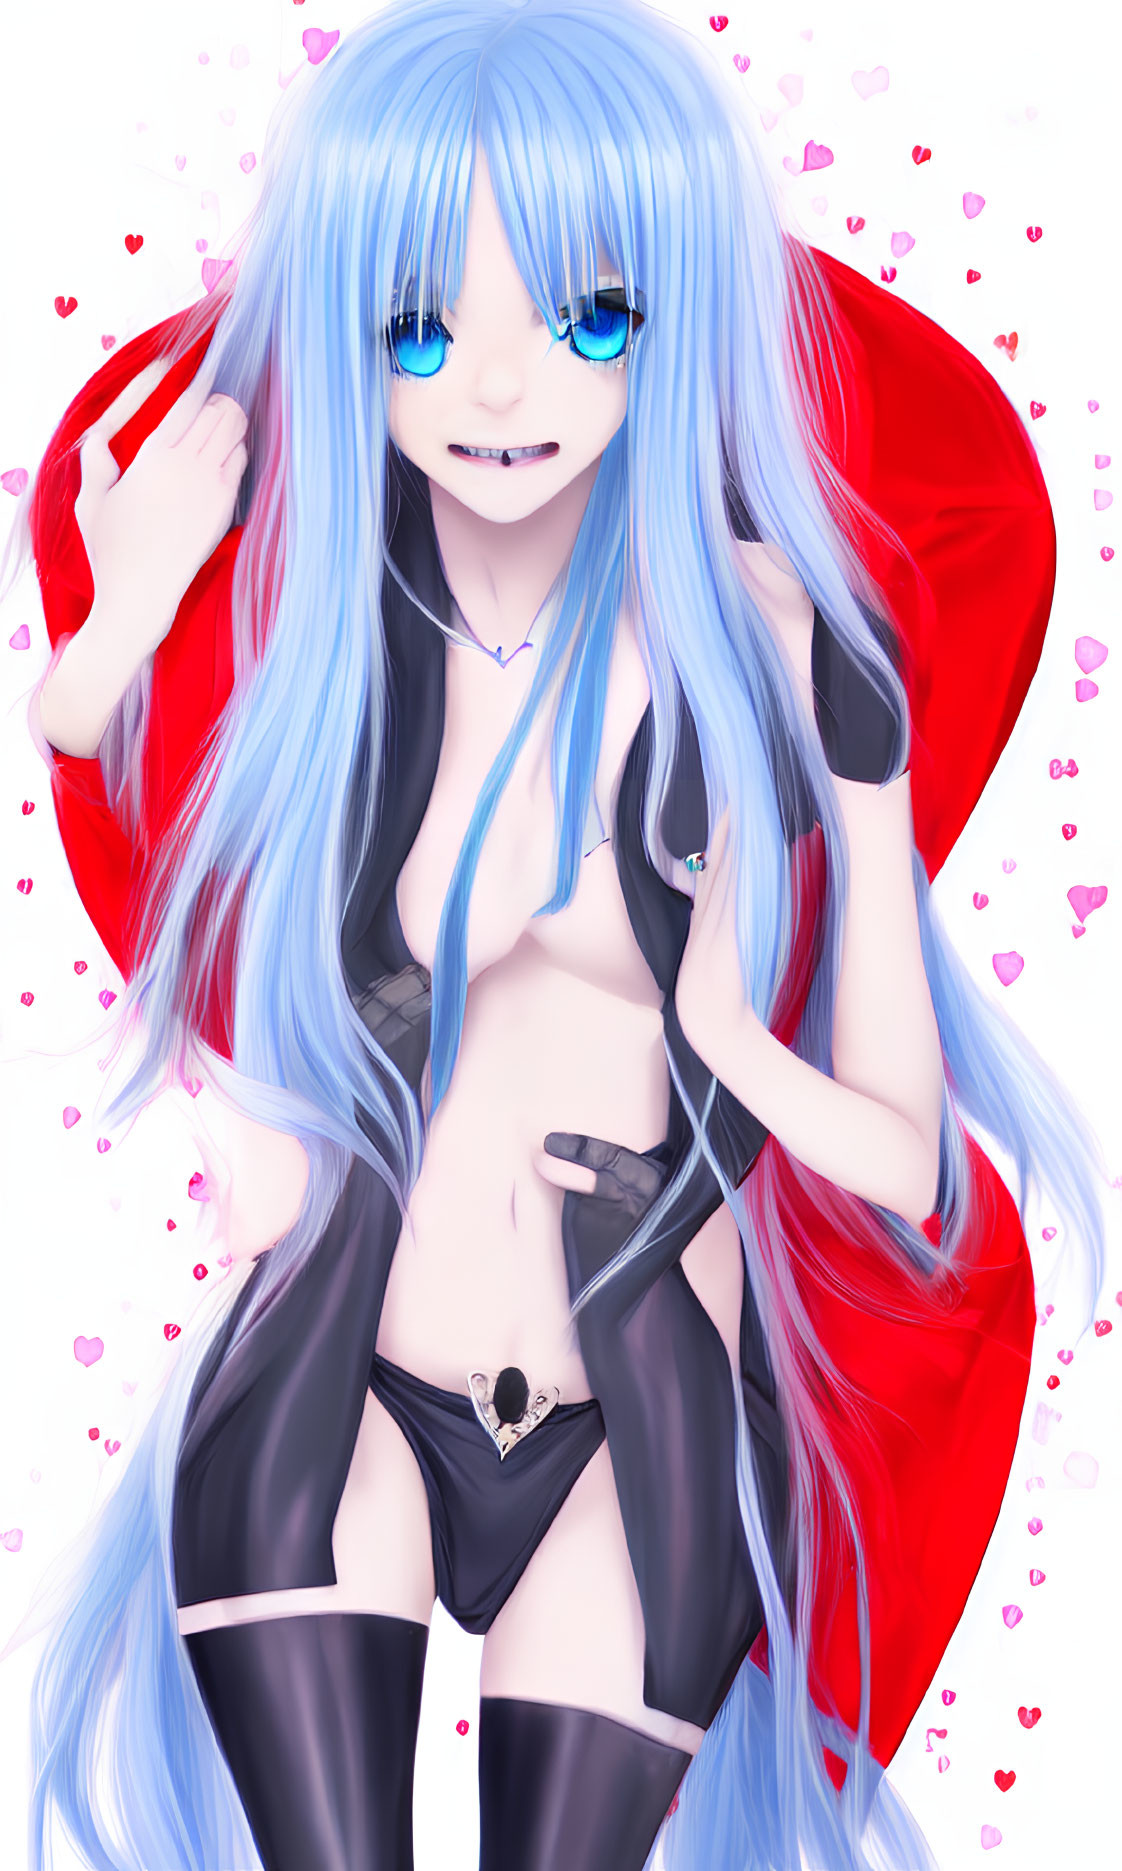 Blue-haired anime character in red cloak and black outfit with pink hearts.